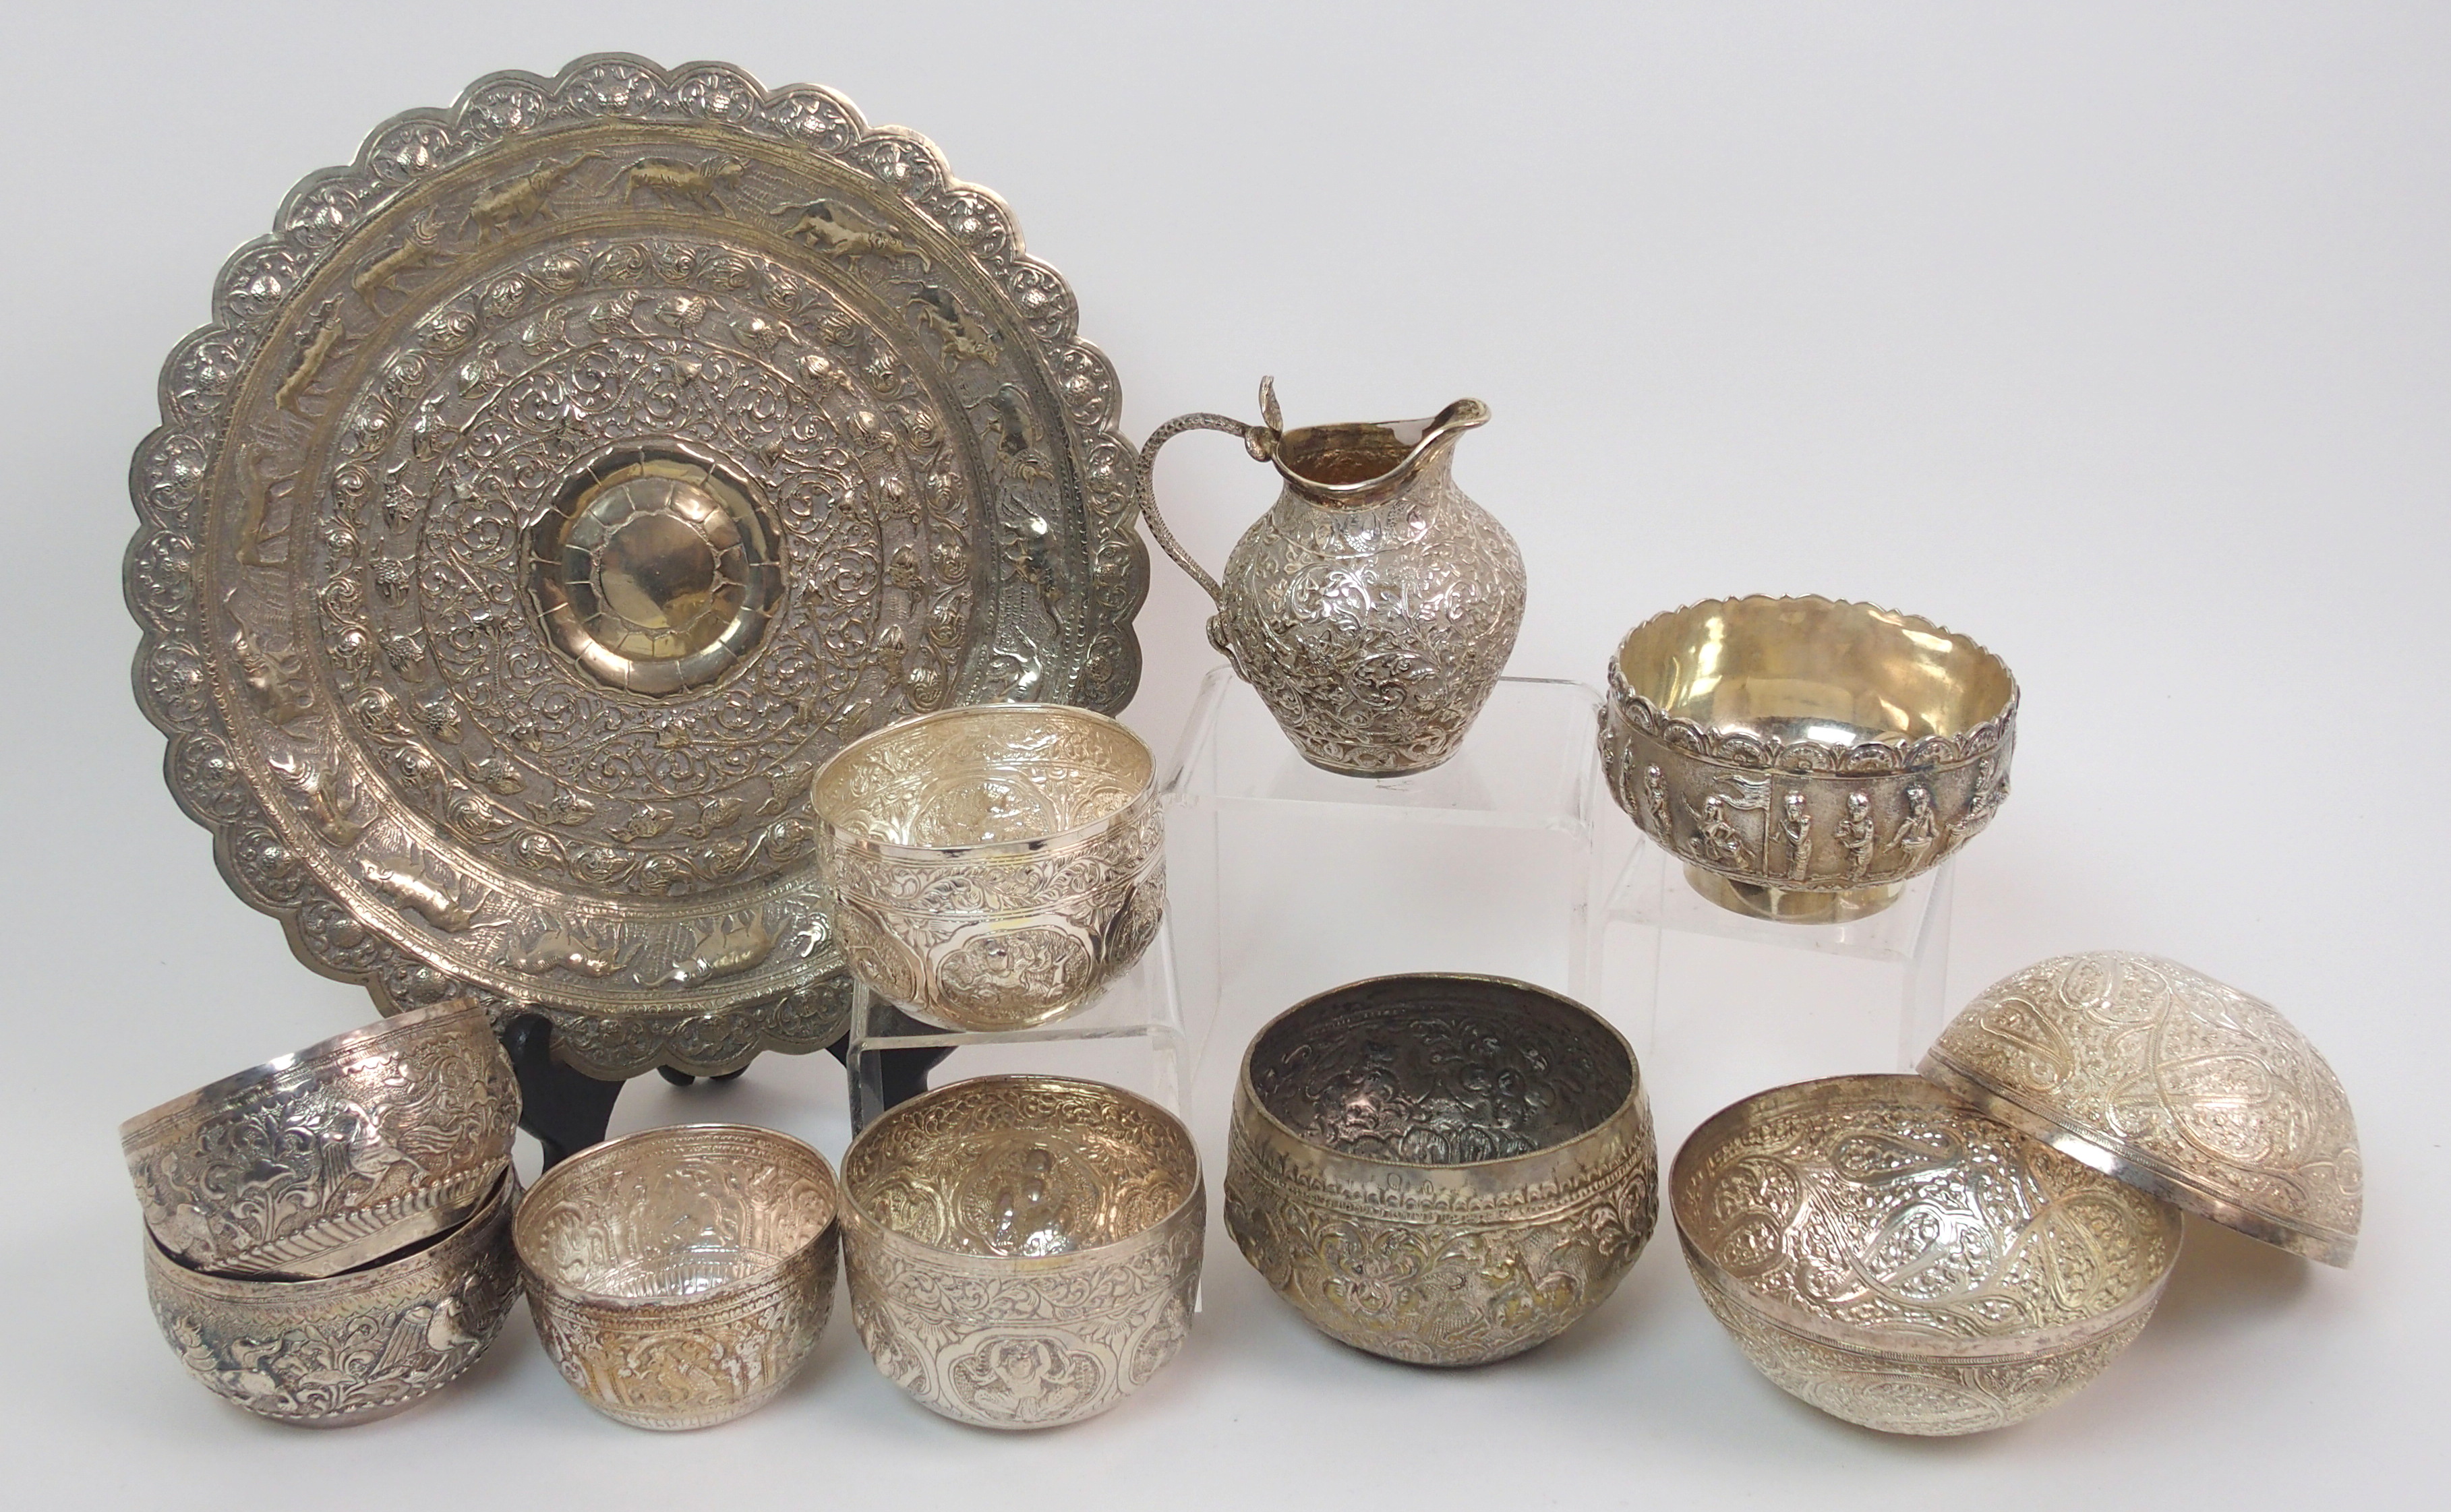 Nine Eastern white metal bowls 7.5 to 9.5cm diameter, a salver decorated with animals 26cm